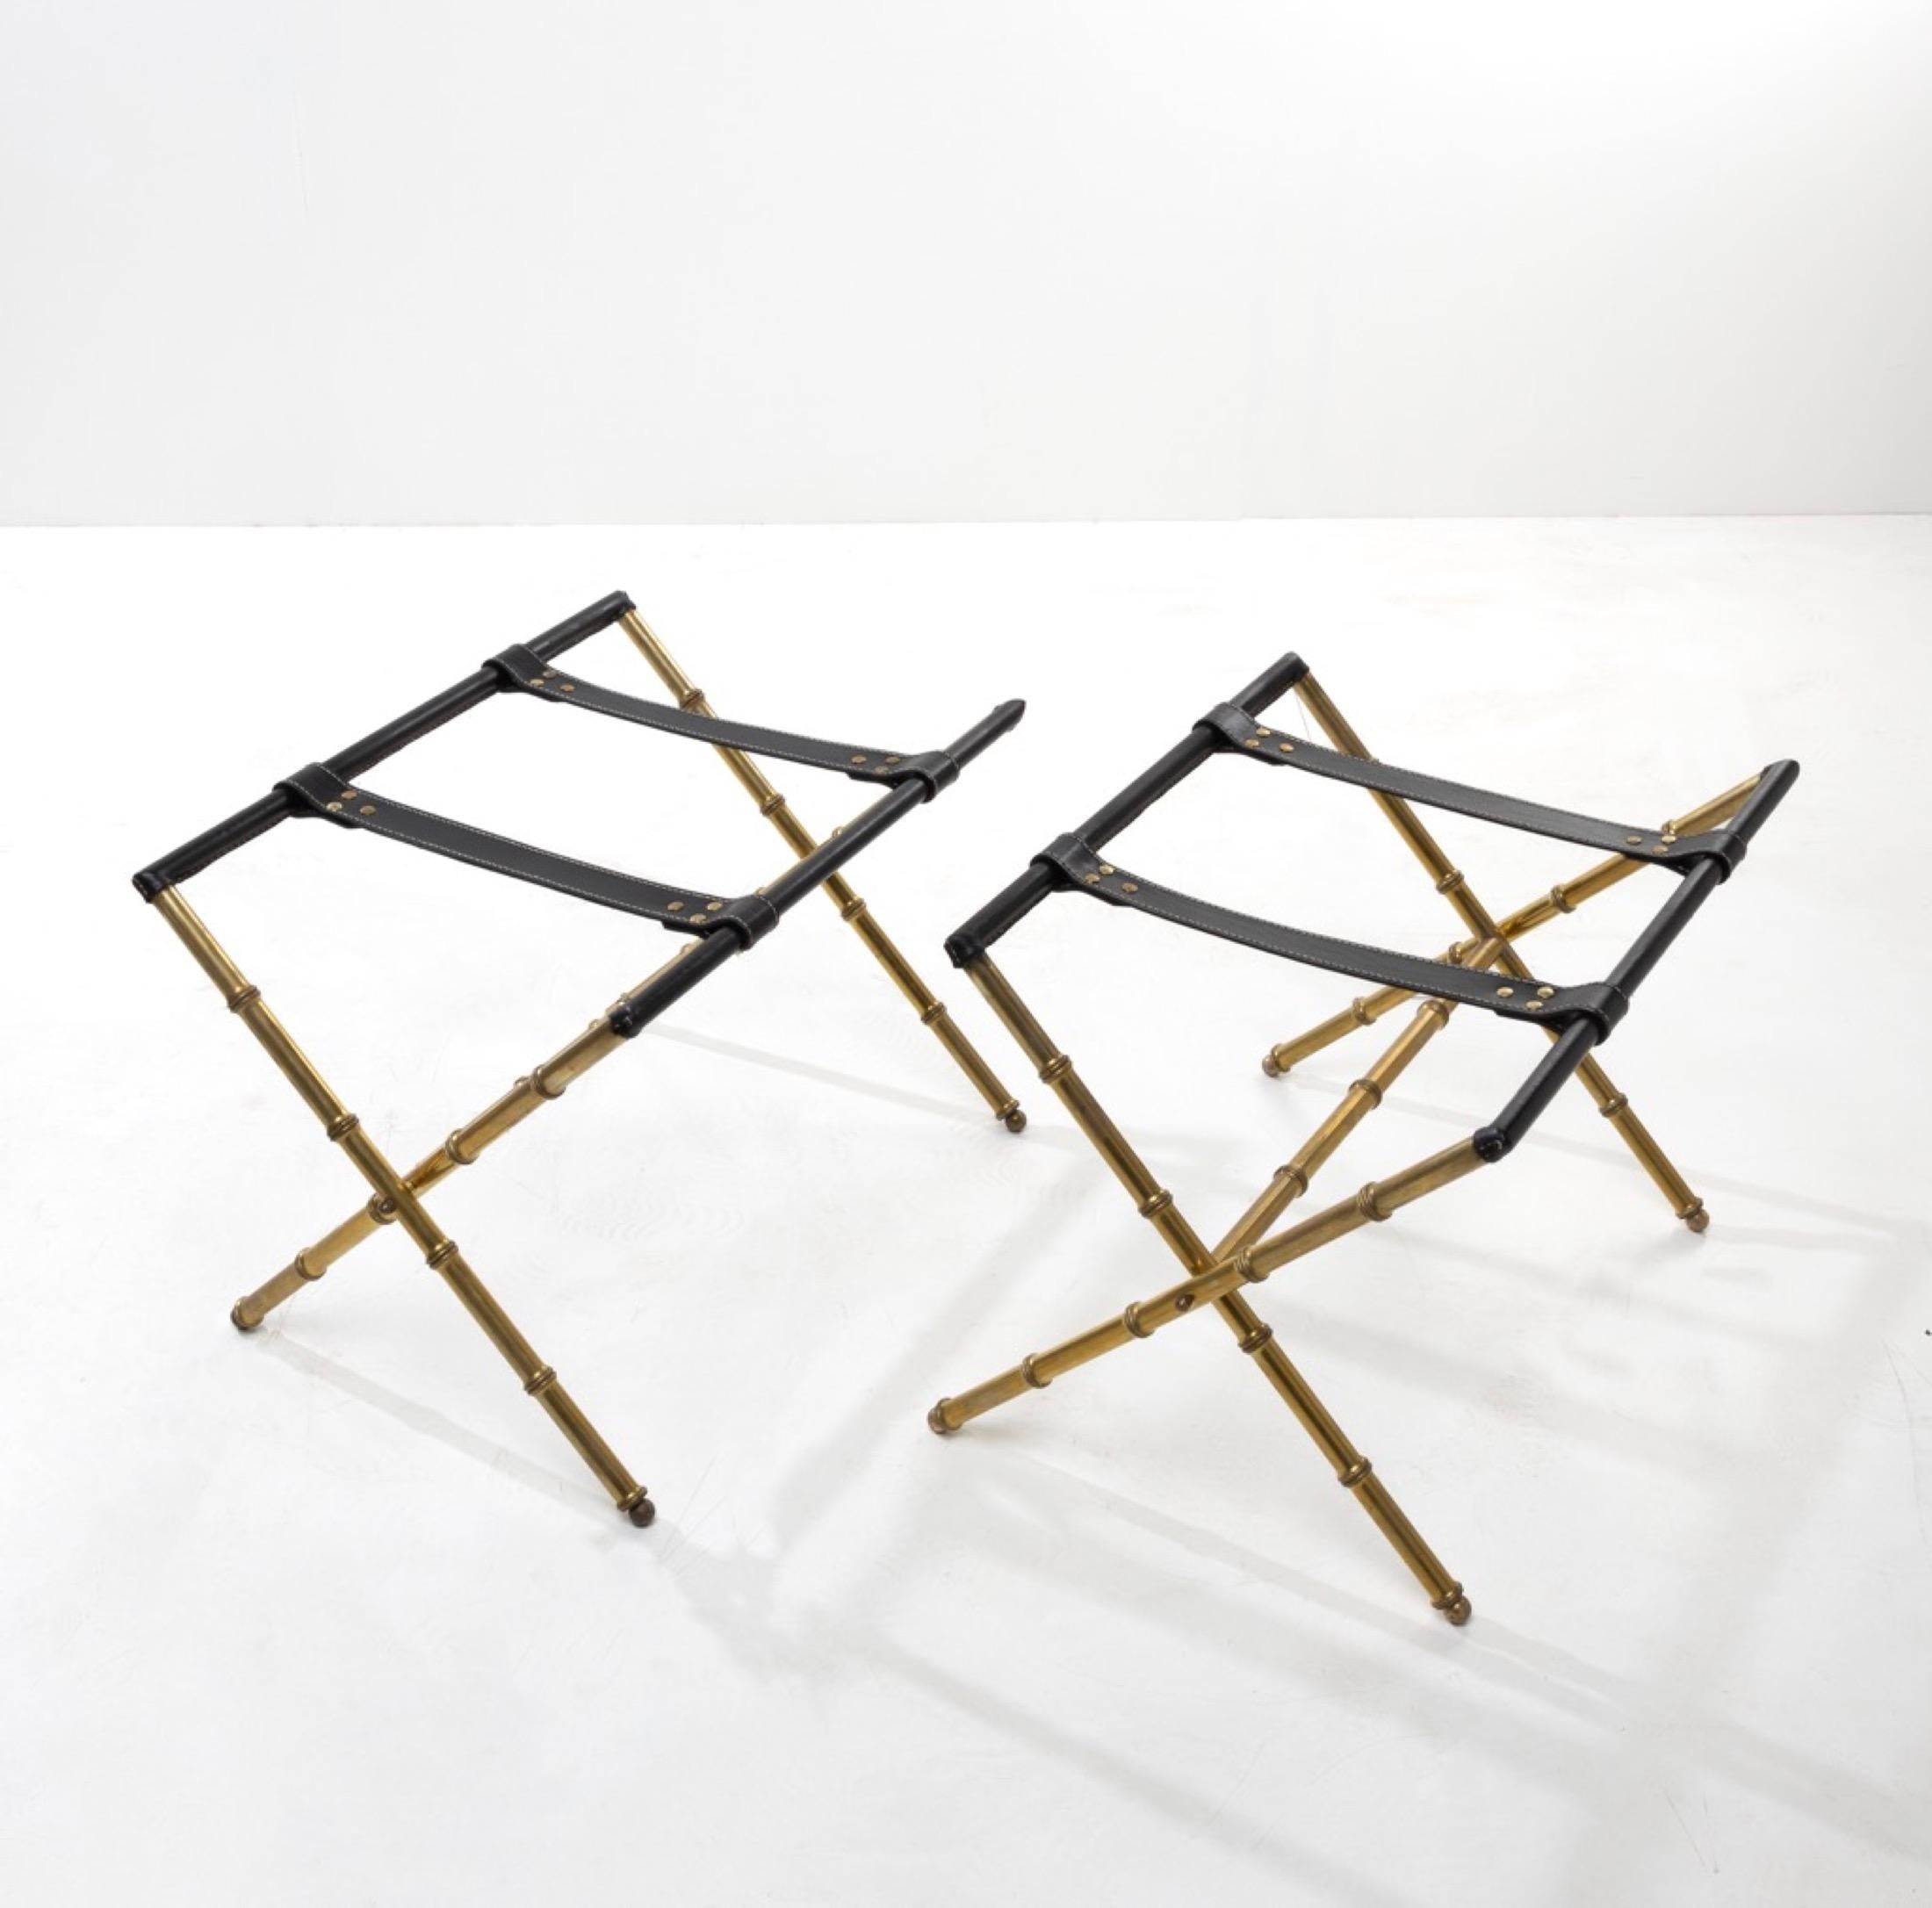 Originally designed by Jacques Adnet to accommodate one or more suitcases, these trestles can also be used as a support for a tray or arranged in pairs as coffee table legs.
They are entirely made of solid copper, (Jacques Adnet and the Compagnie